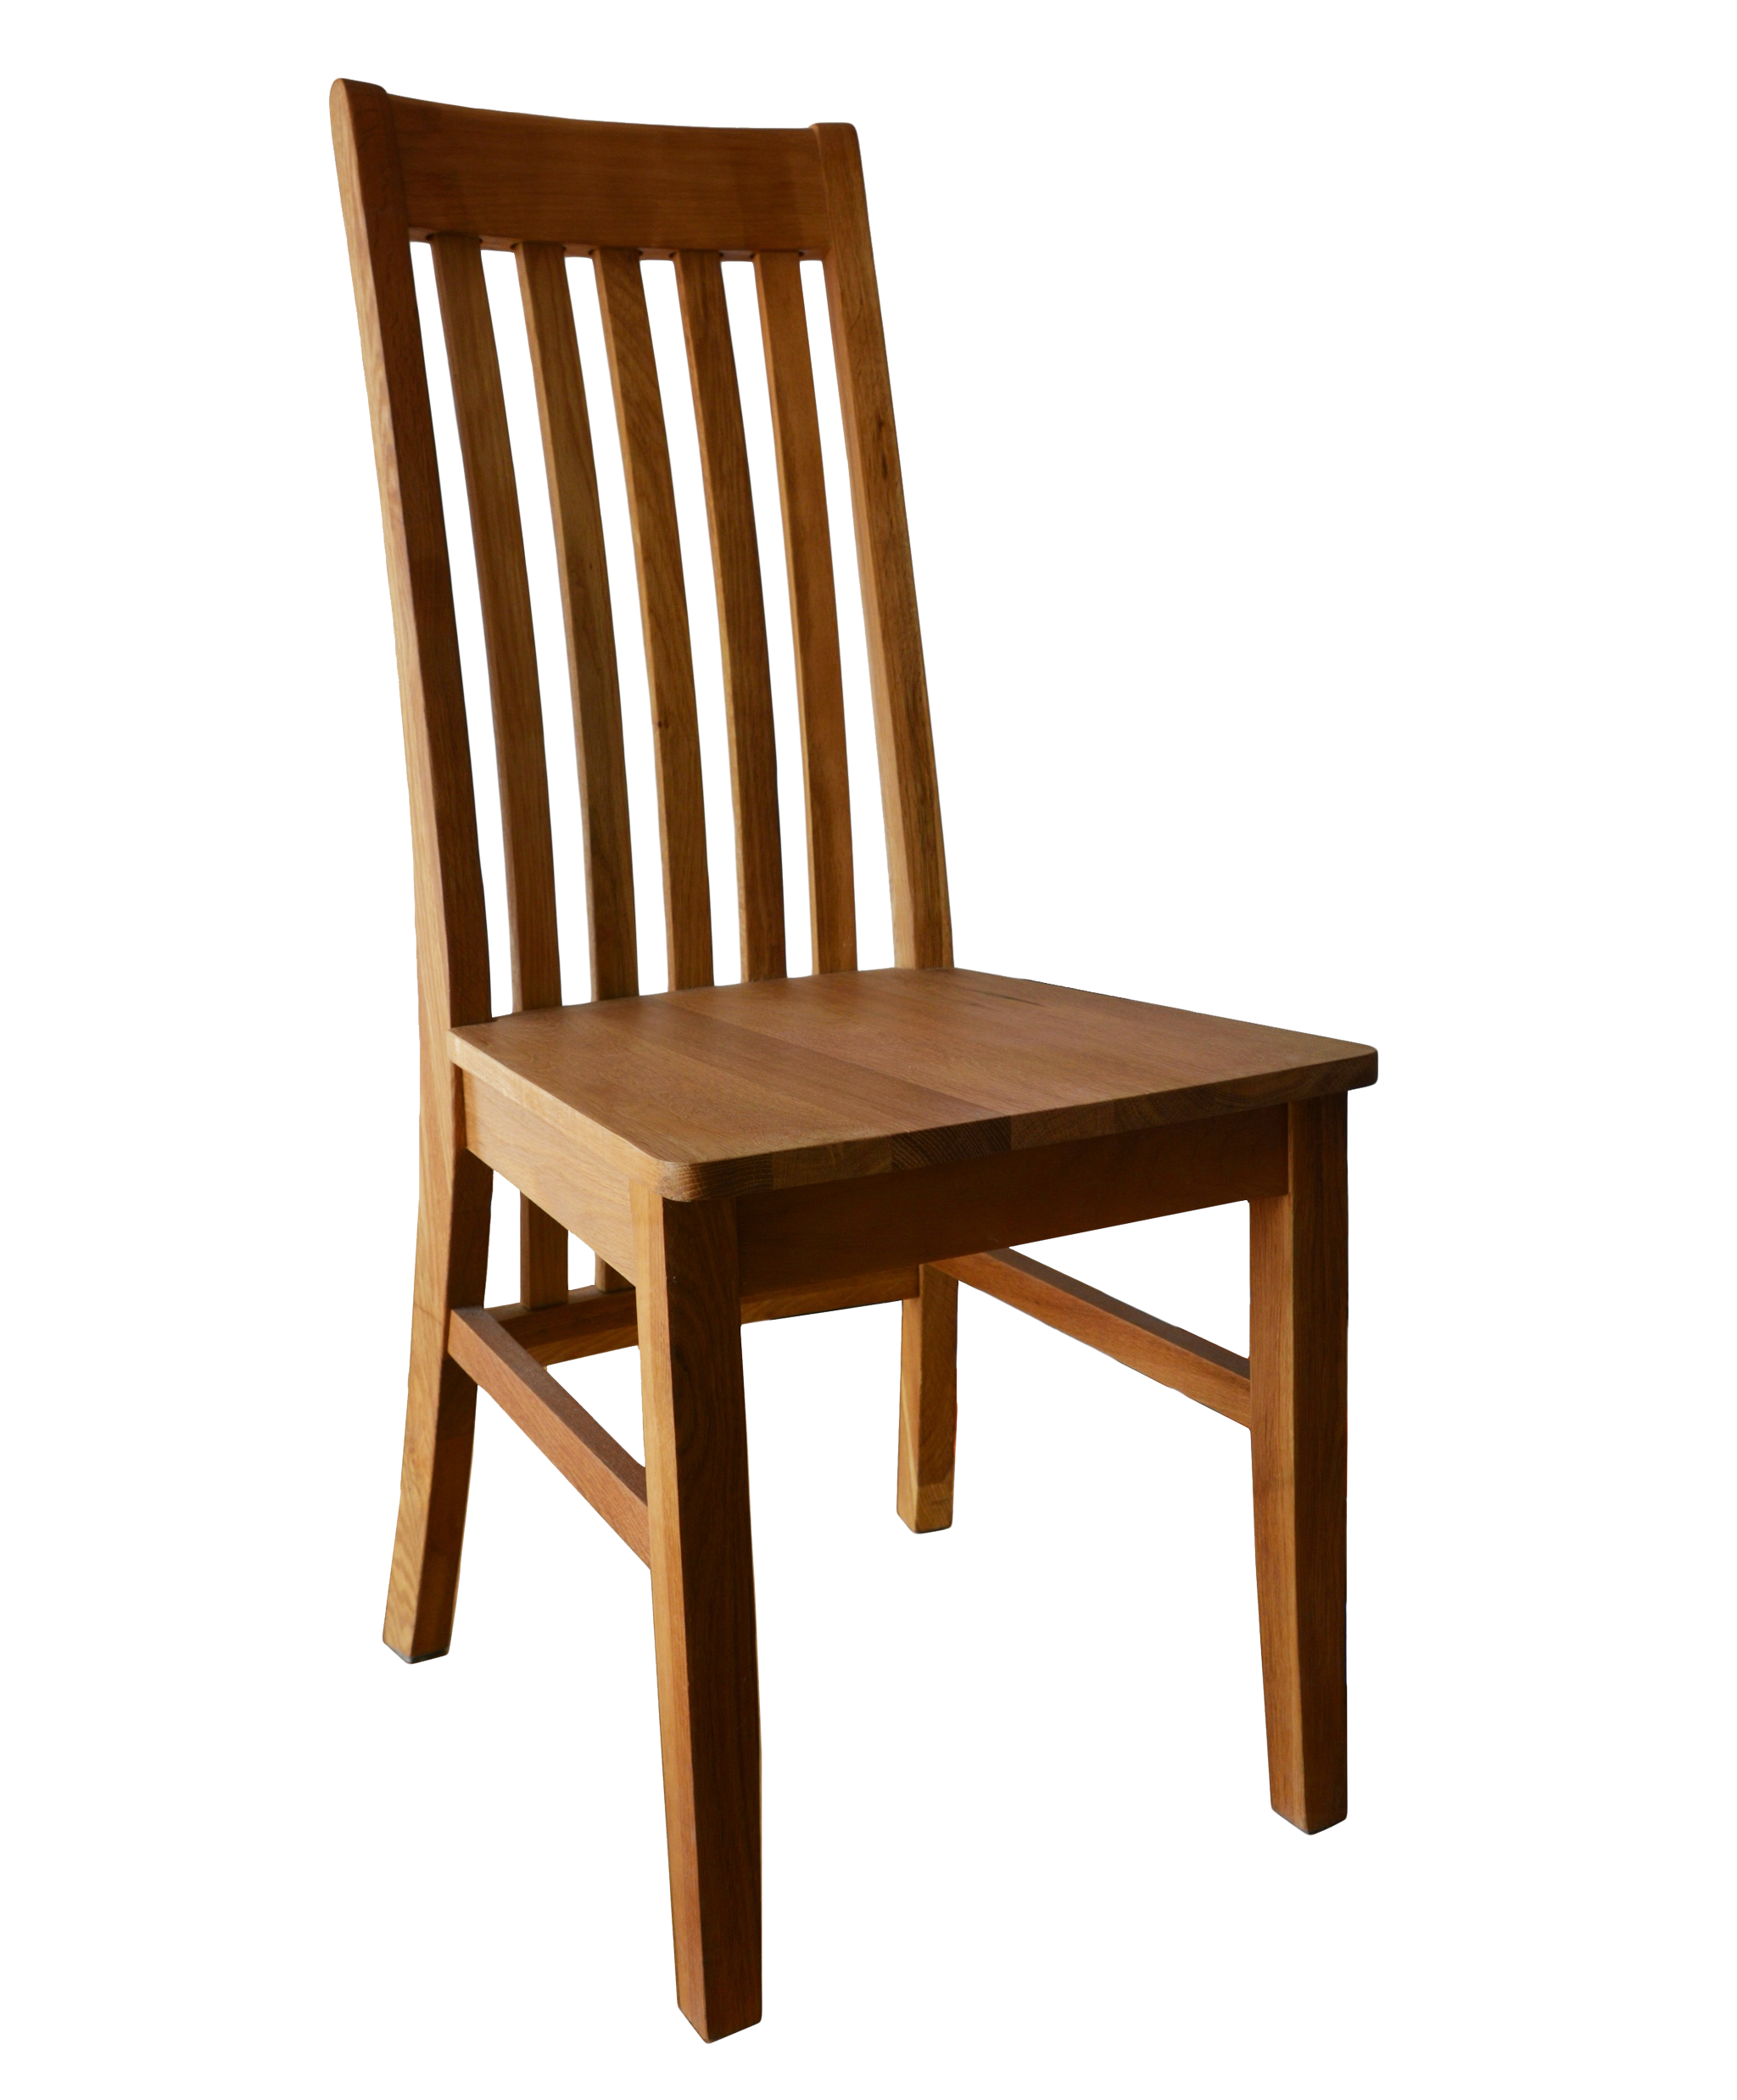 Image result for wooden chair without background